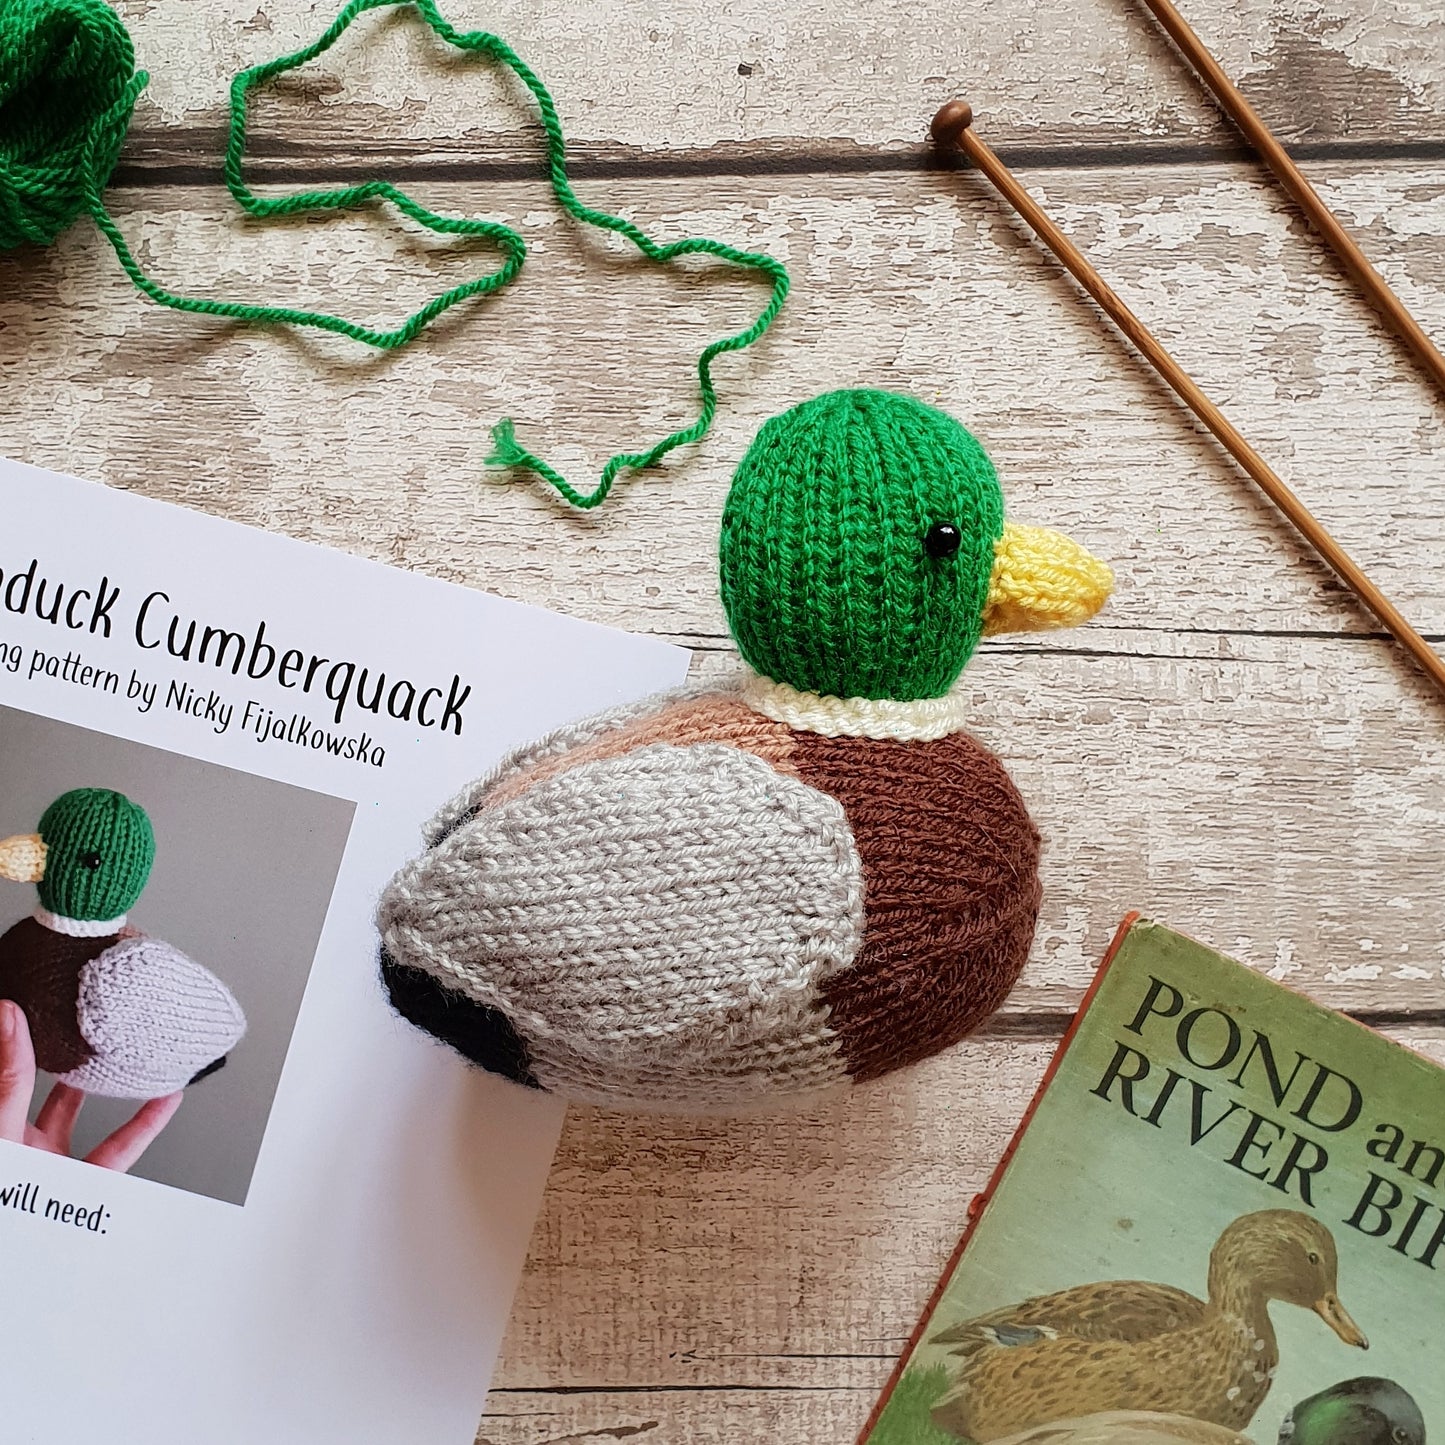 knitted toy mallard duck with a knitting pattern from a knit kit